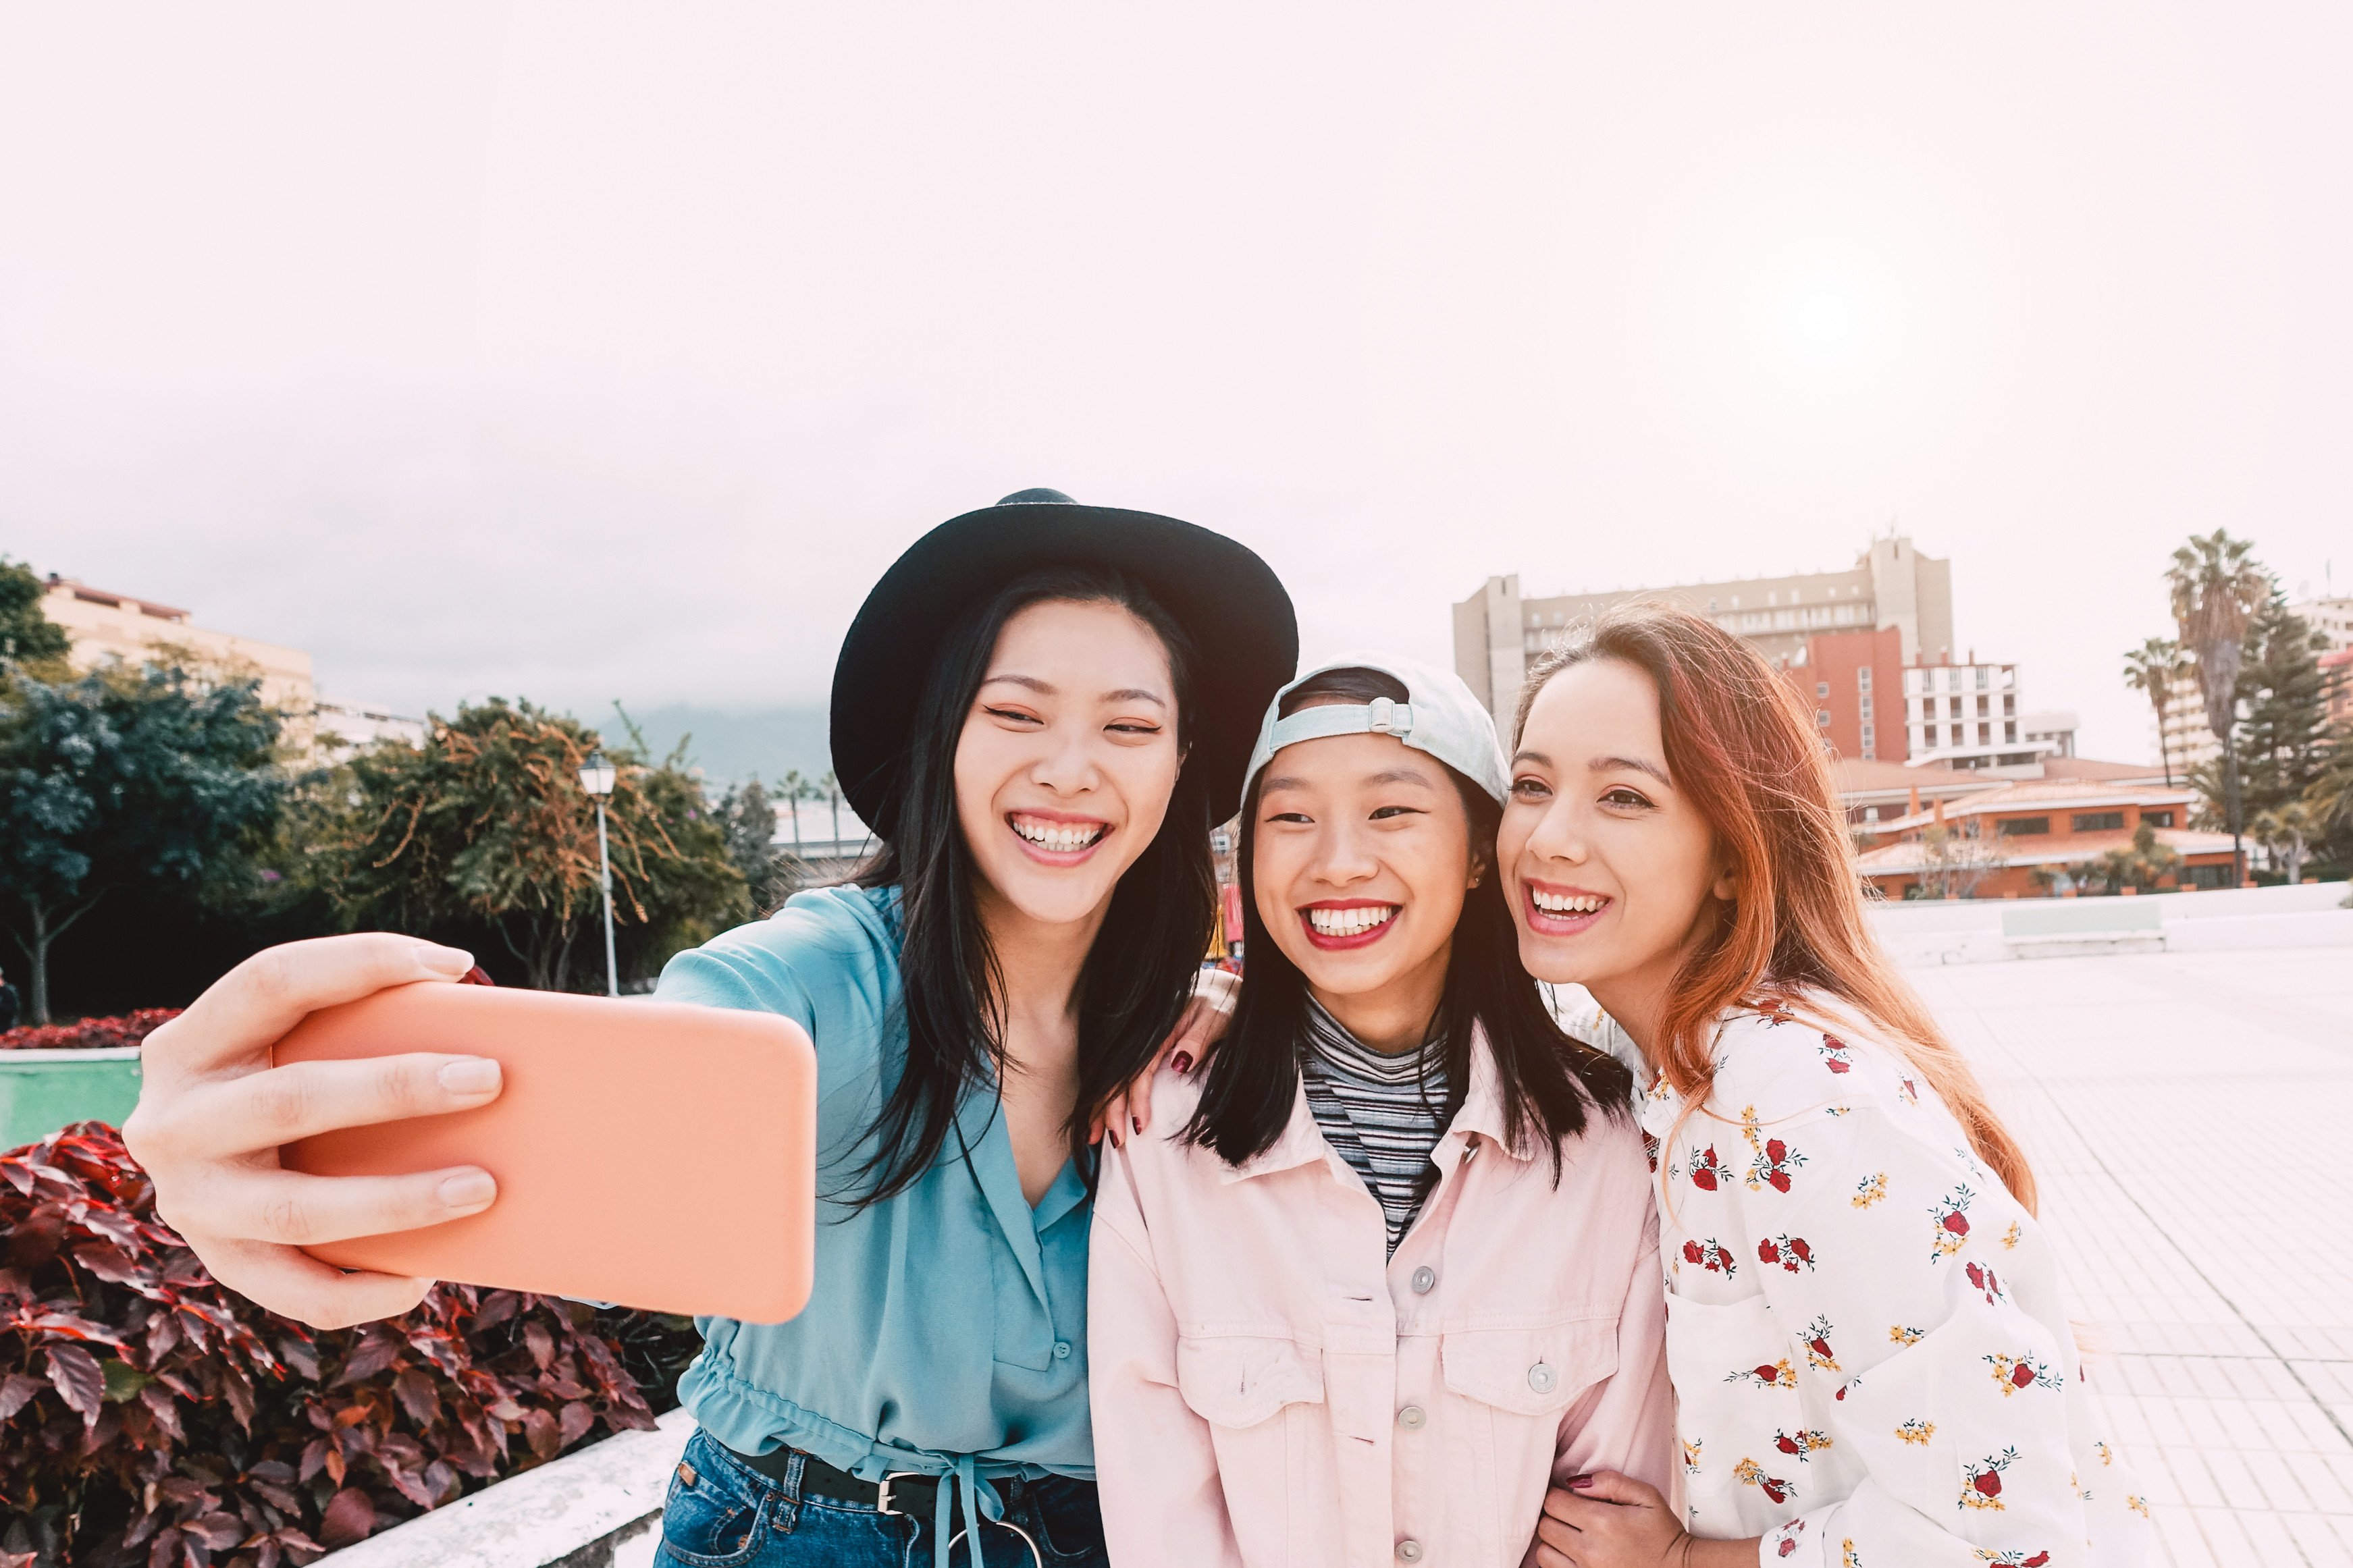 The influence and spending potential of China’s Gen Z population make them a major target group for many brands, both large and small. Photo: Shutterstock